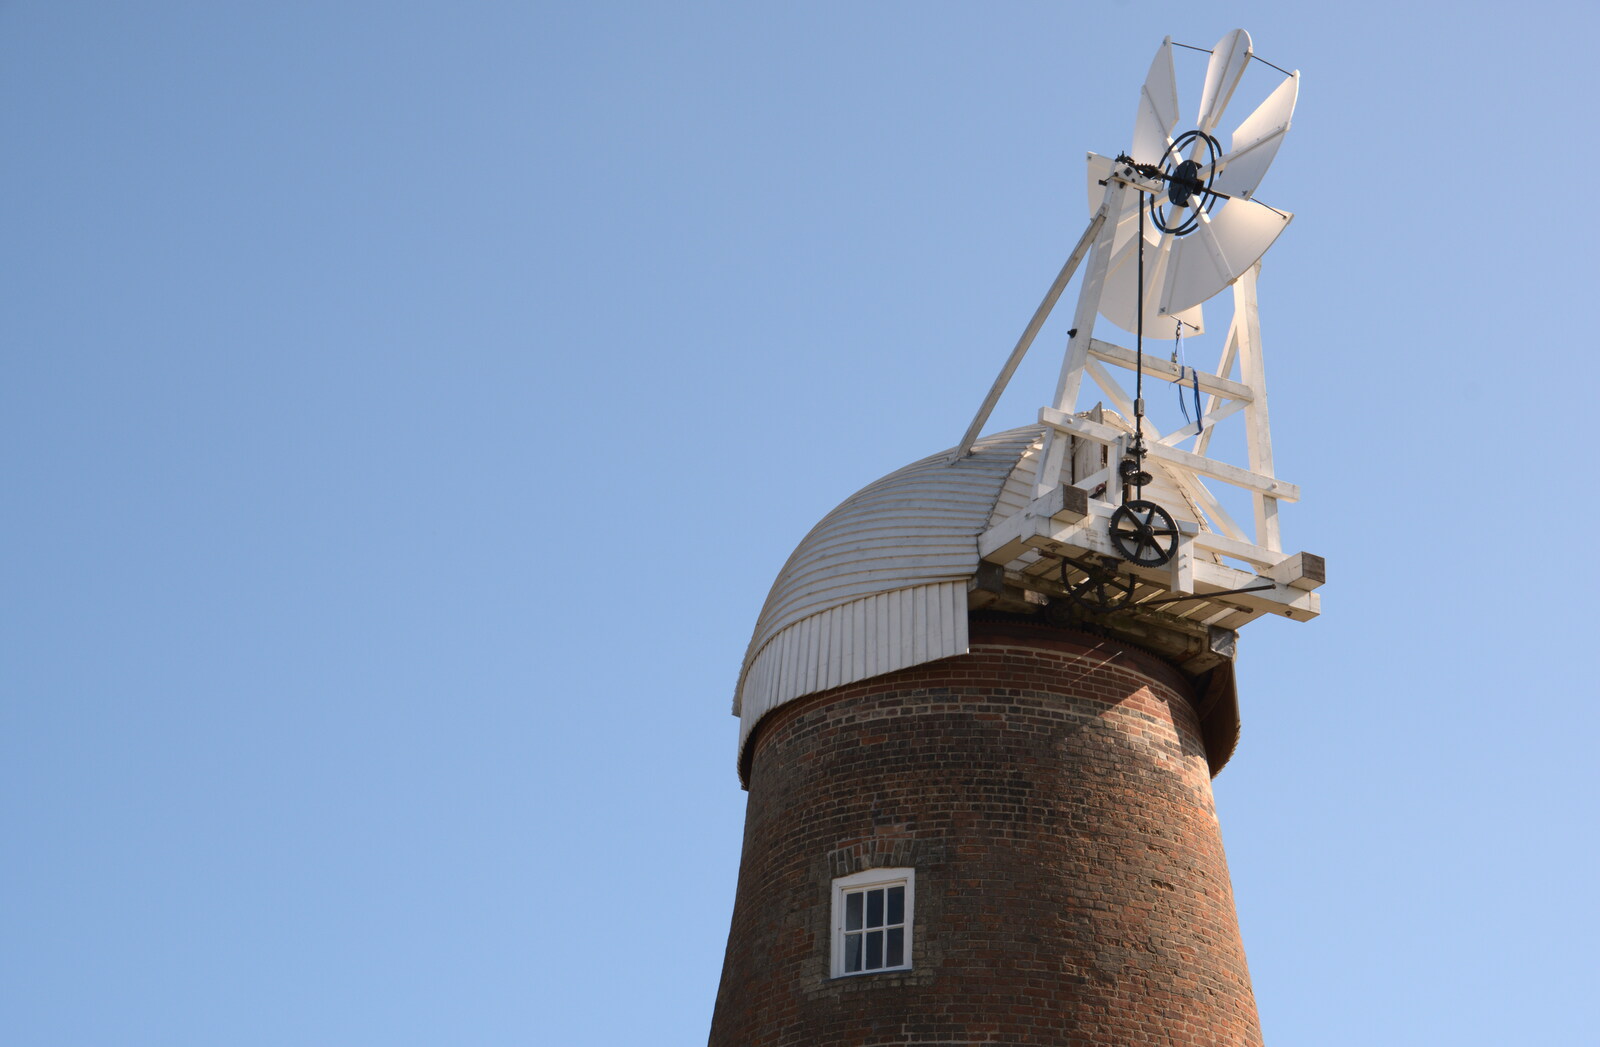 The cap and fantail wait from A Sail Fitting, Billingford Windmill, Billingford, Norfolk - 20th August 2020